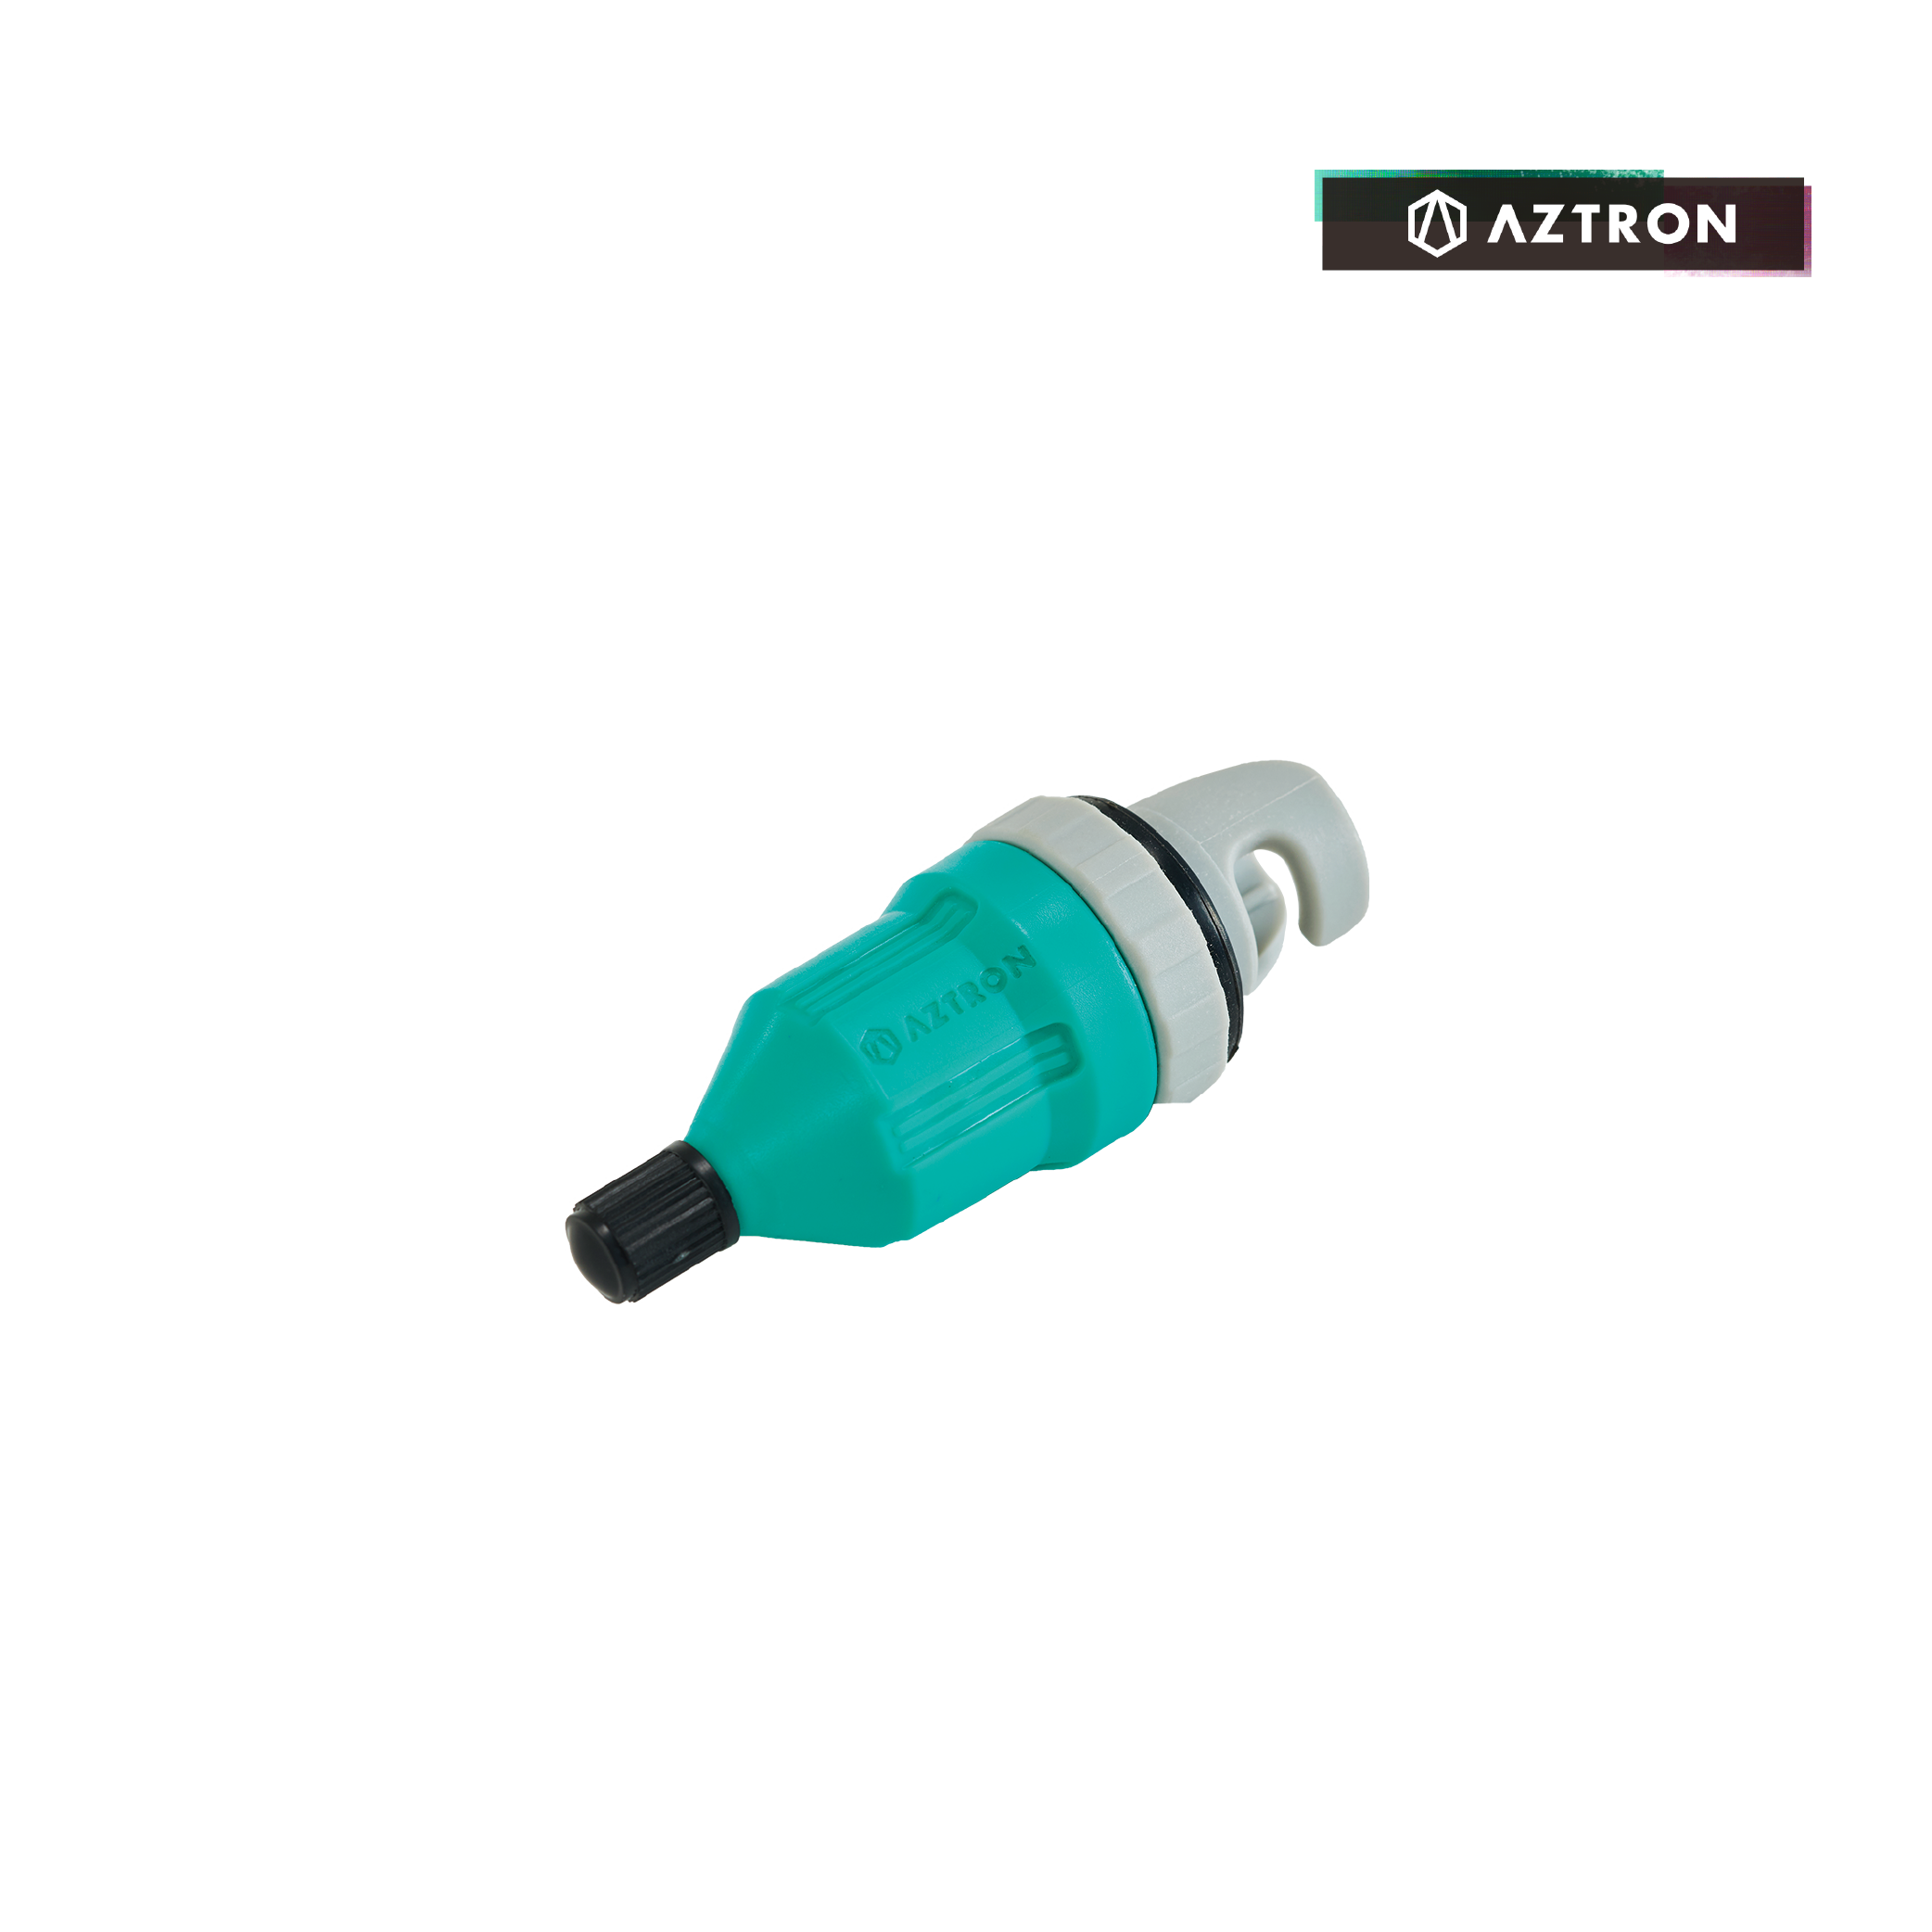 AZTRON SUP Ventil Adapter